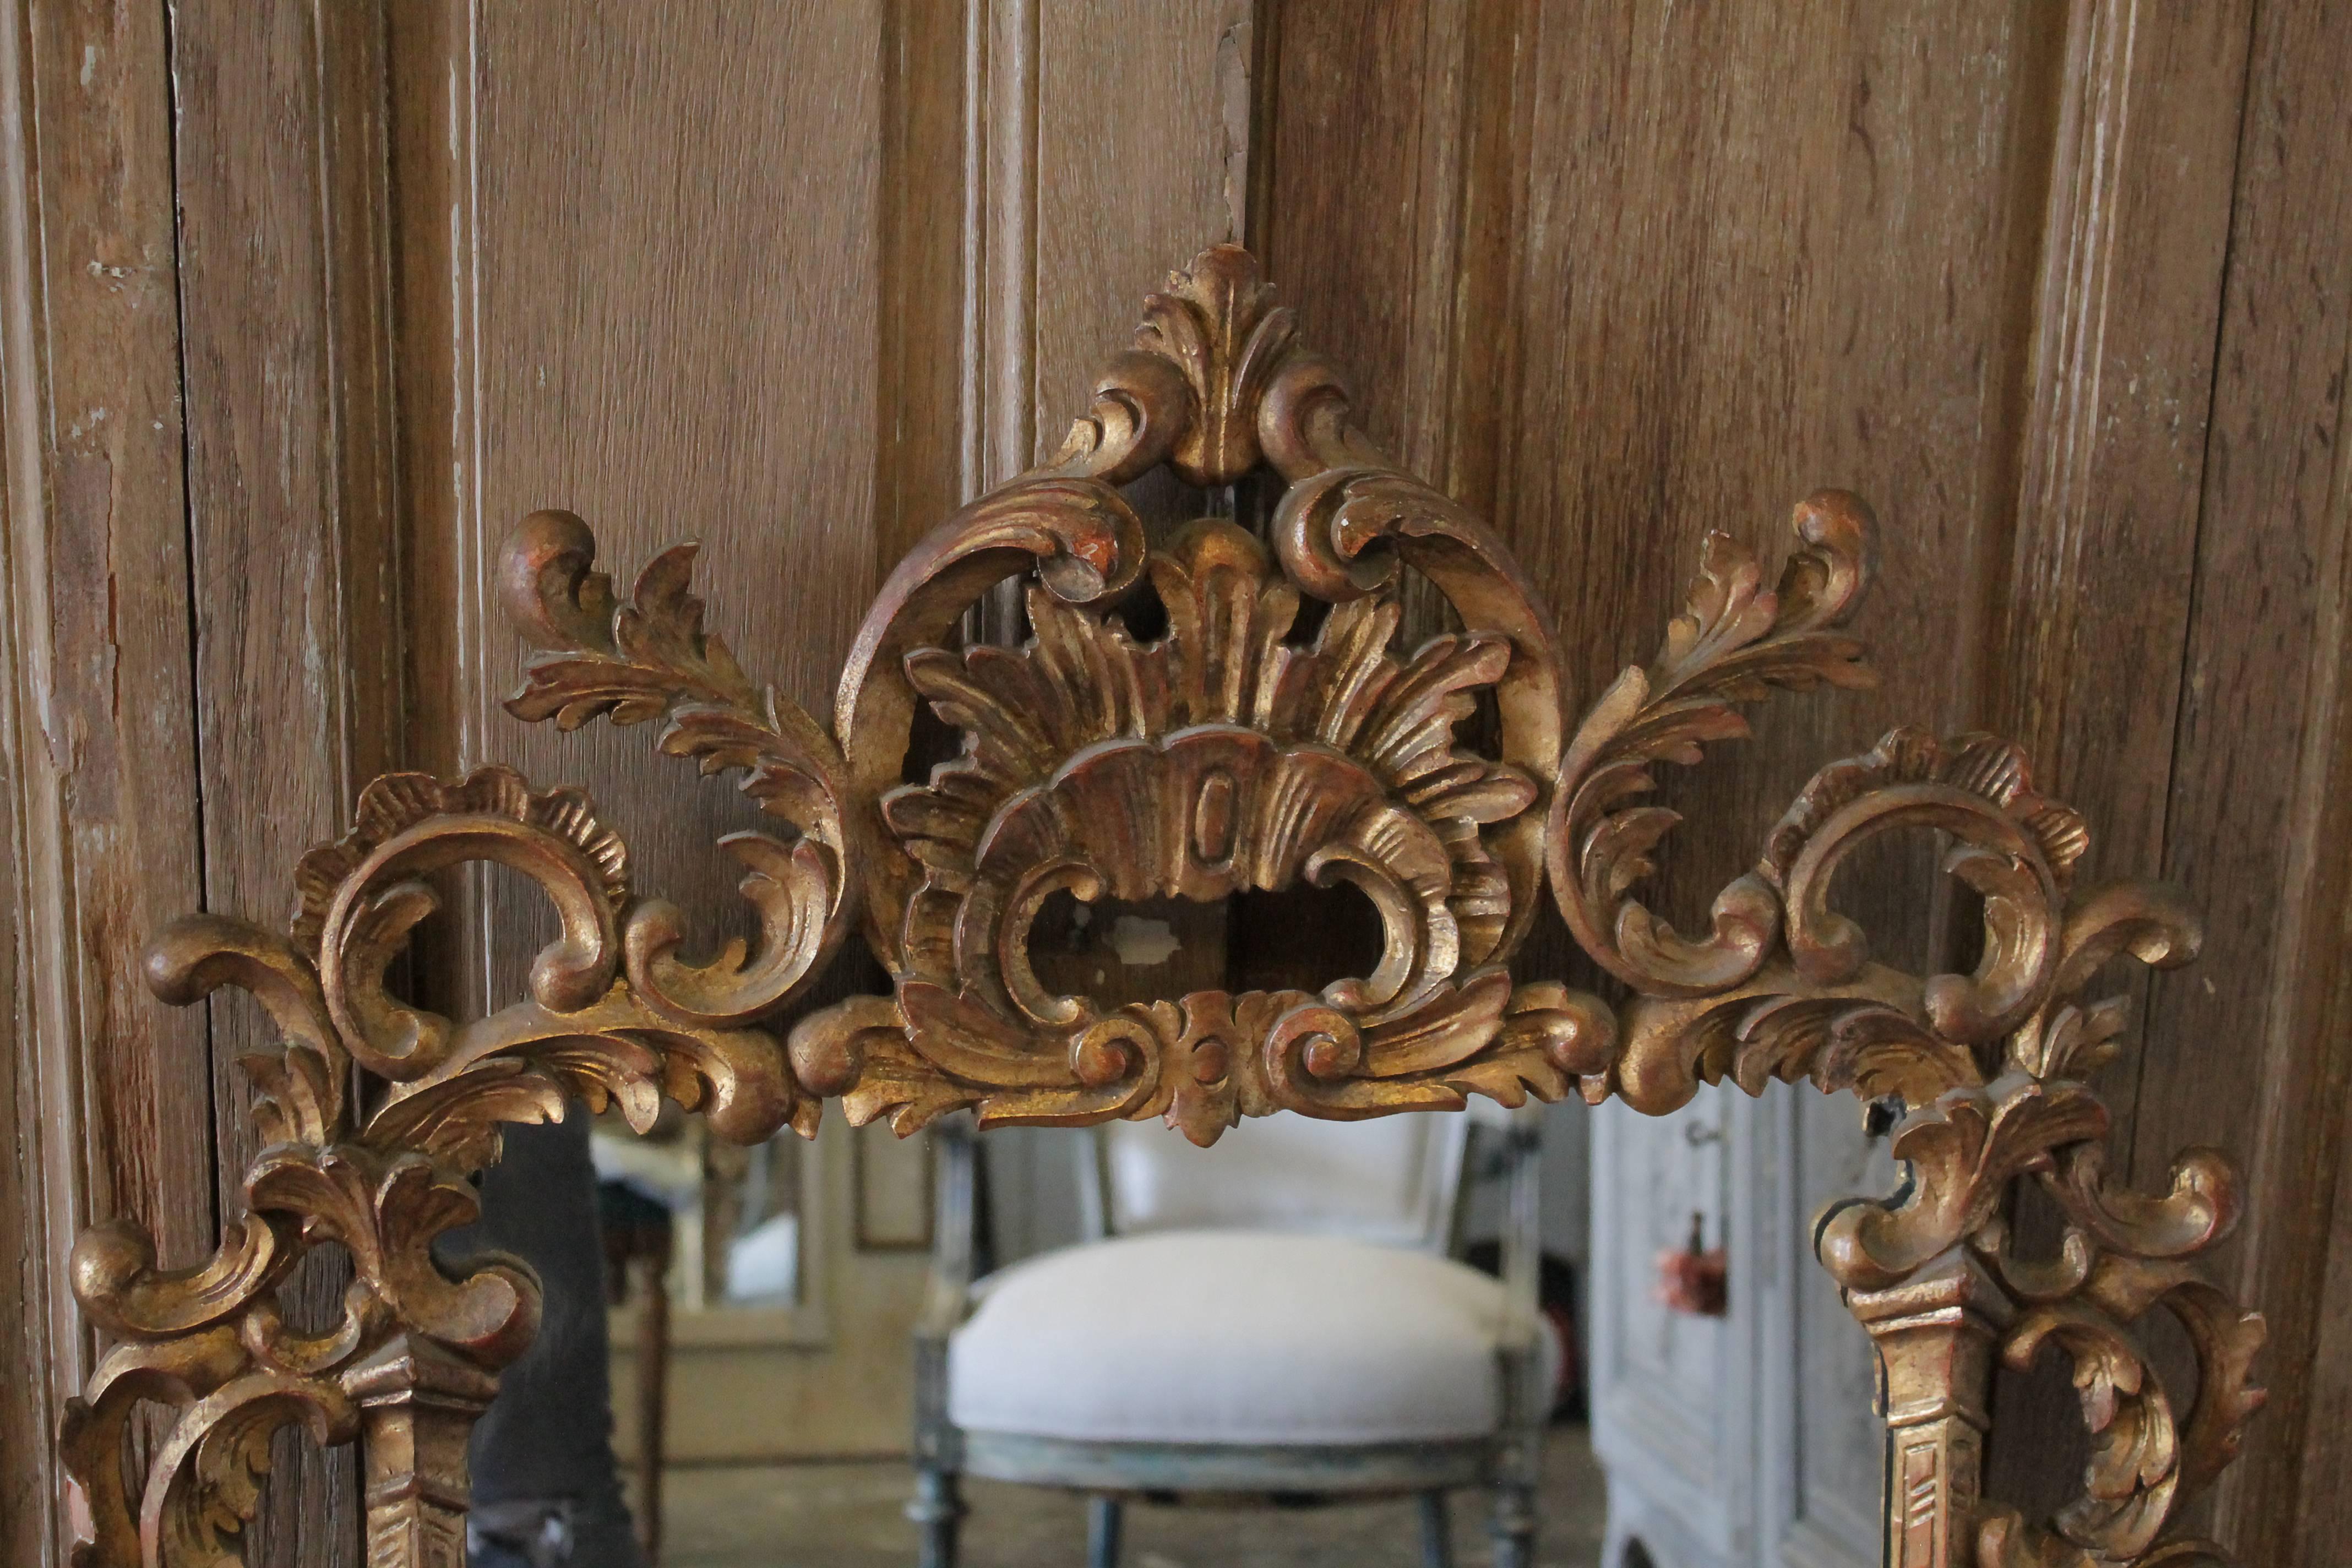 Vintage carved Italian giltwood mirror, the gilt is more of a matte, not extremely shiny.
Measures: 30.5